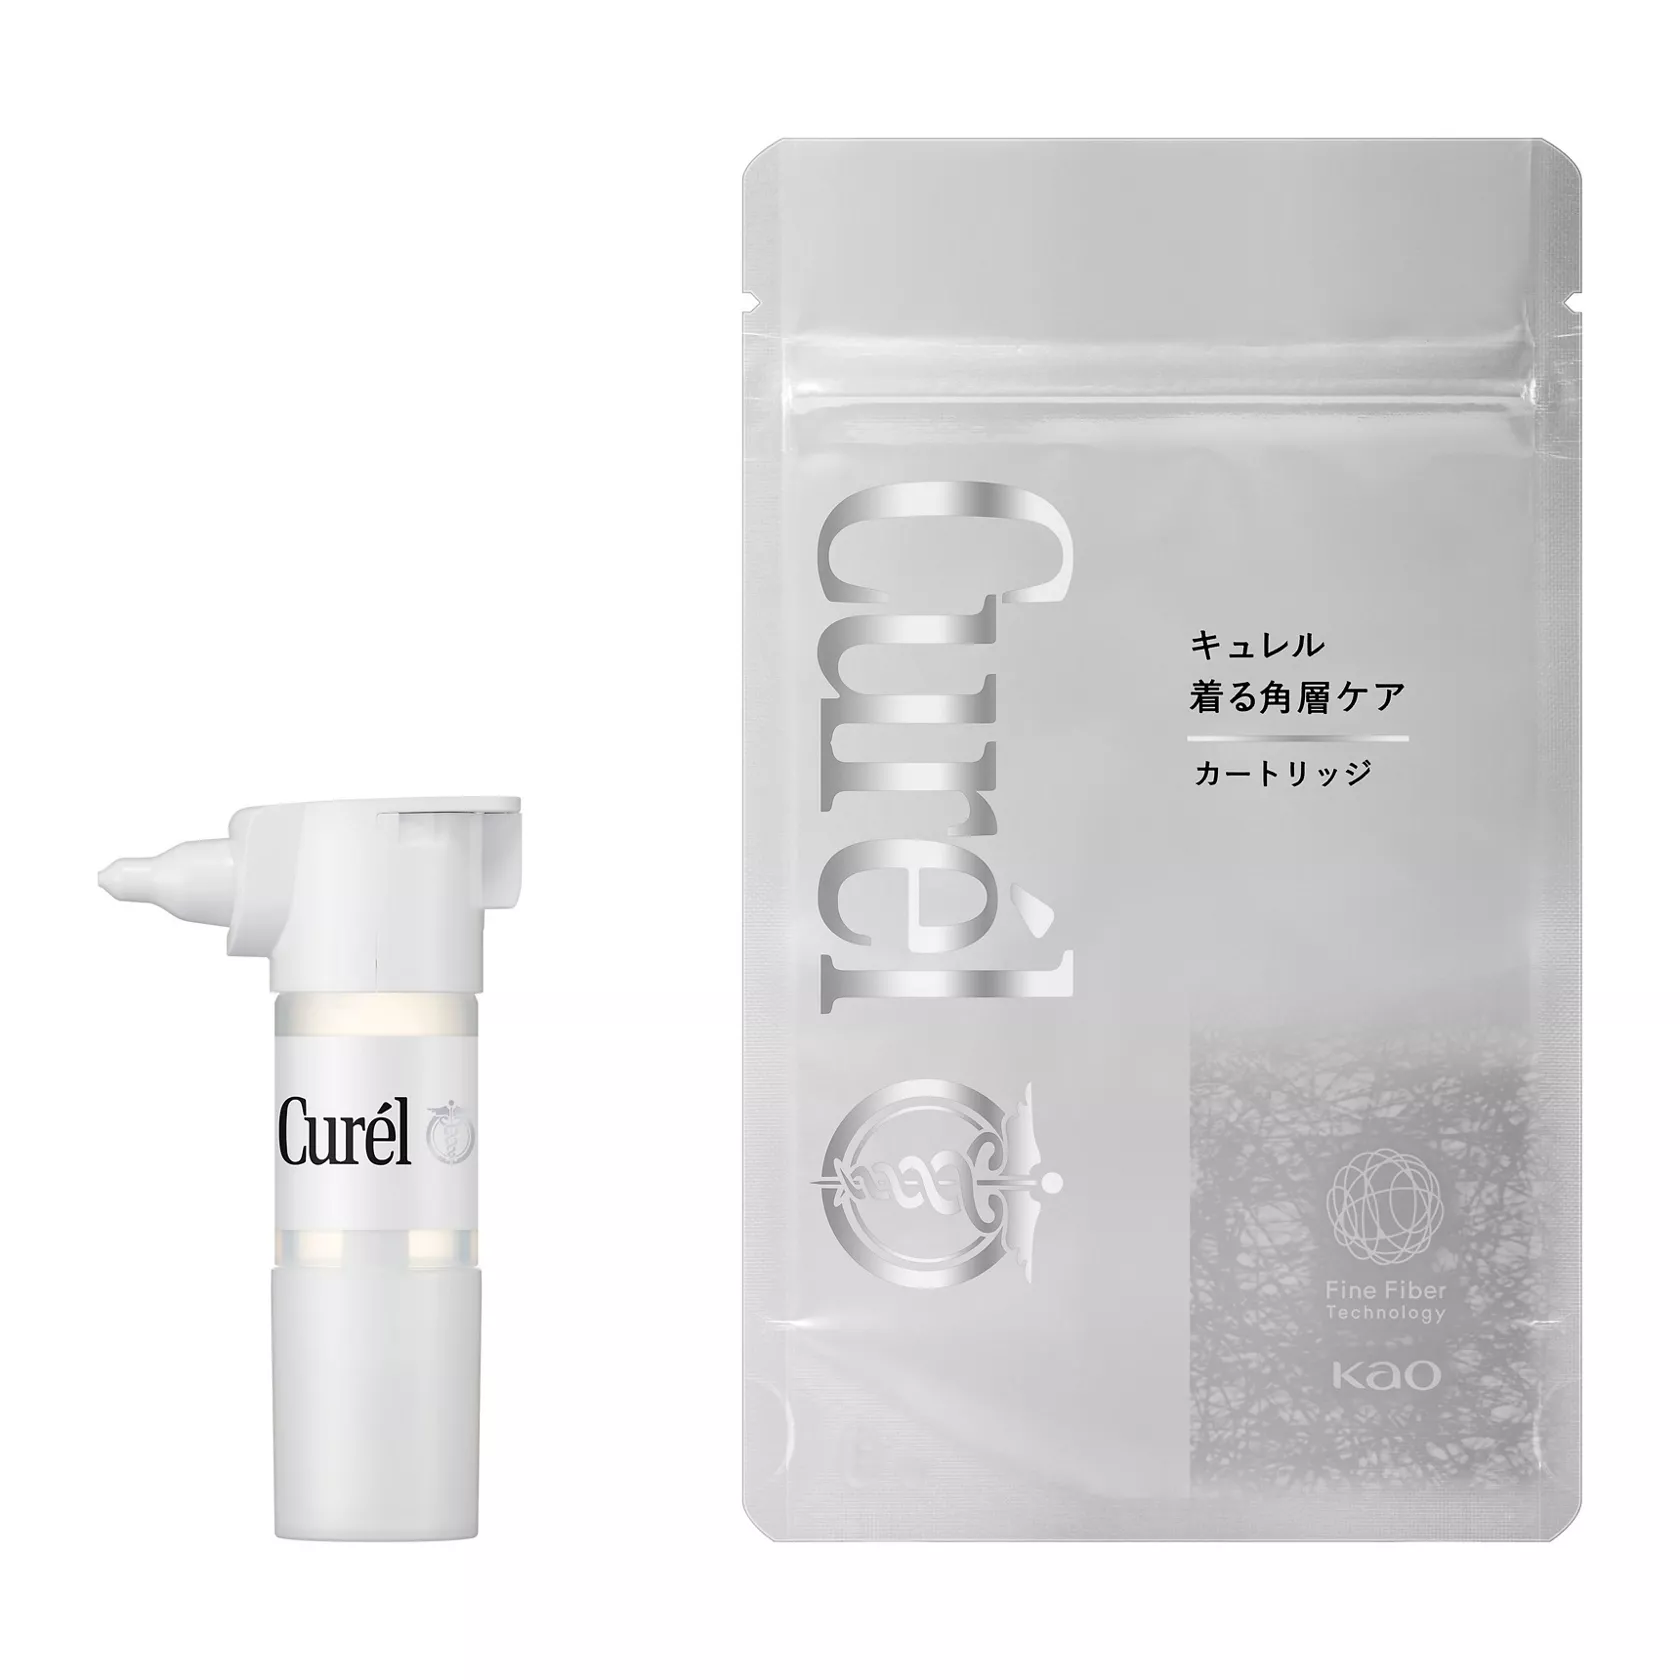 Kao  Introducing “Wearable Stratum Corneum Care”: a new method to relieve  concerns about severely dry skin through a moisture-rich, ultra-thin veil: Kao  launches Curél Outfit-for-Skin Potion and Curél Veil Creator